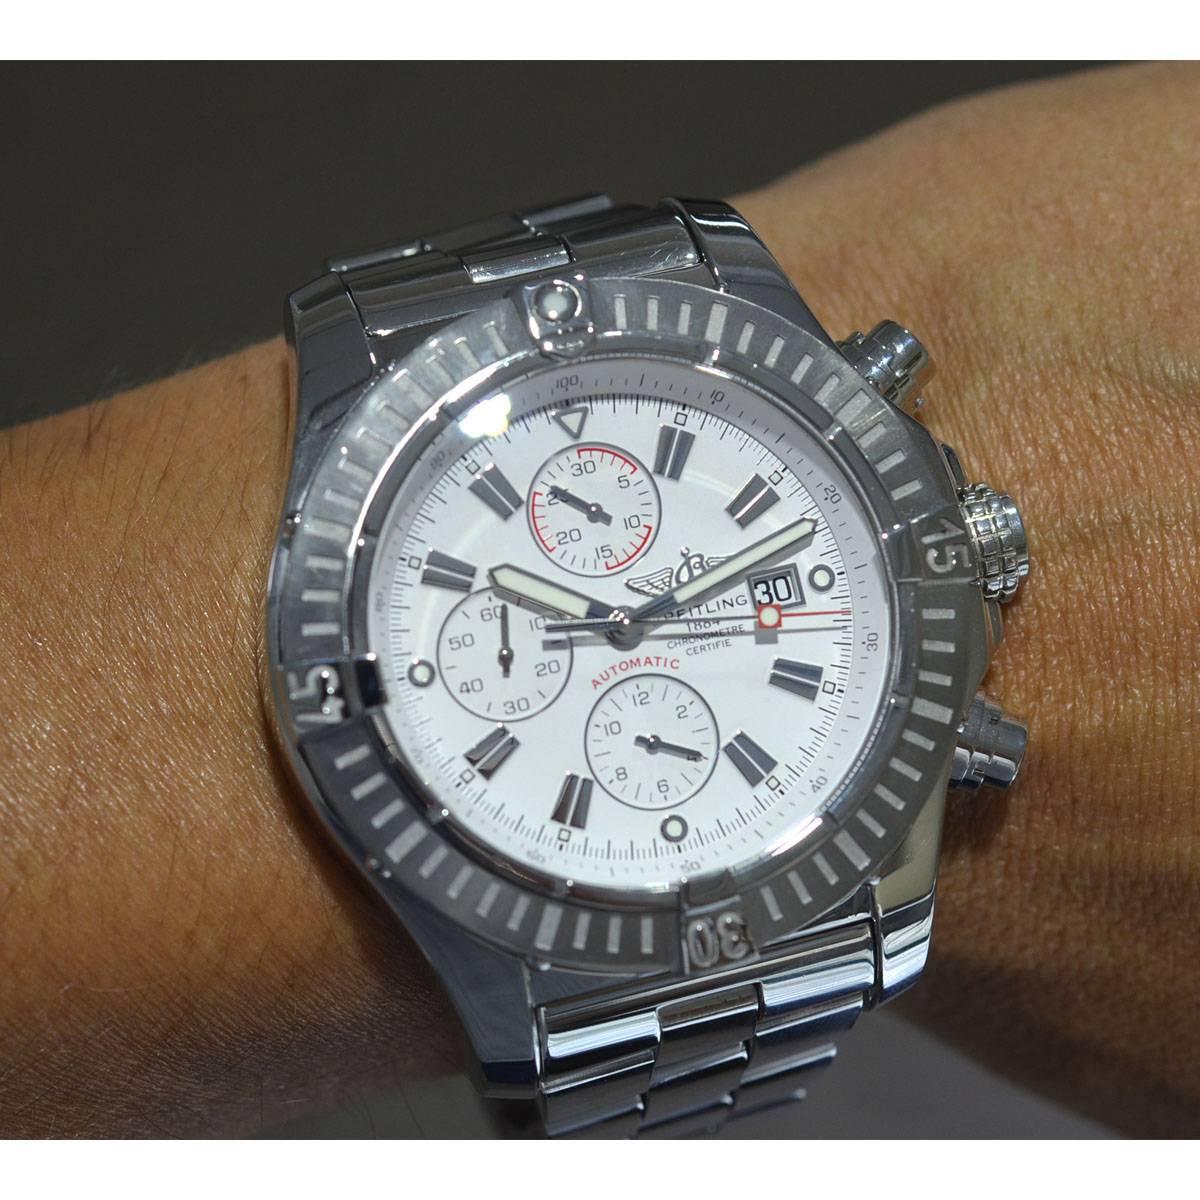 Breitling A13370 Super Avenger Stainless Steel White Dial Chronograph Watch 1